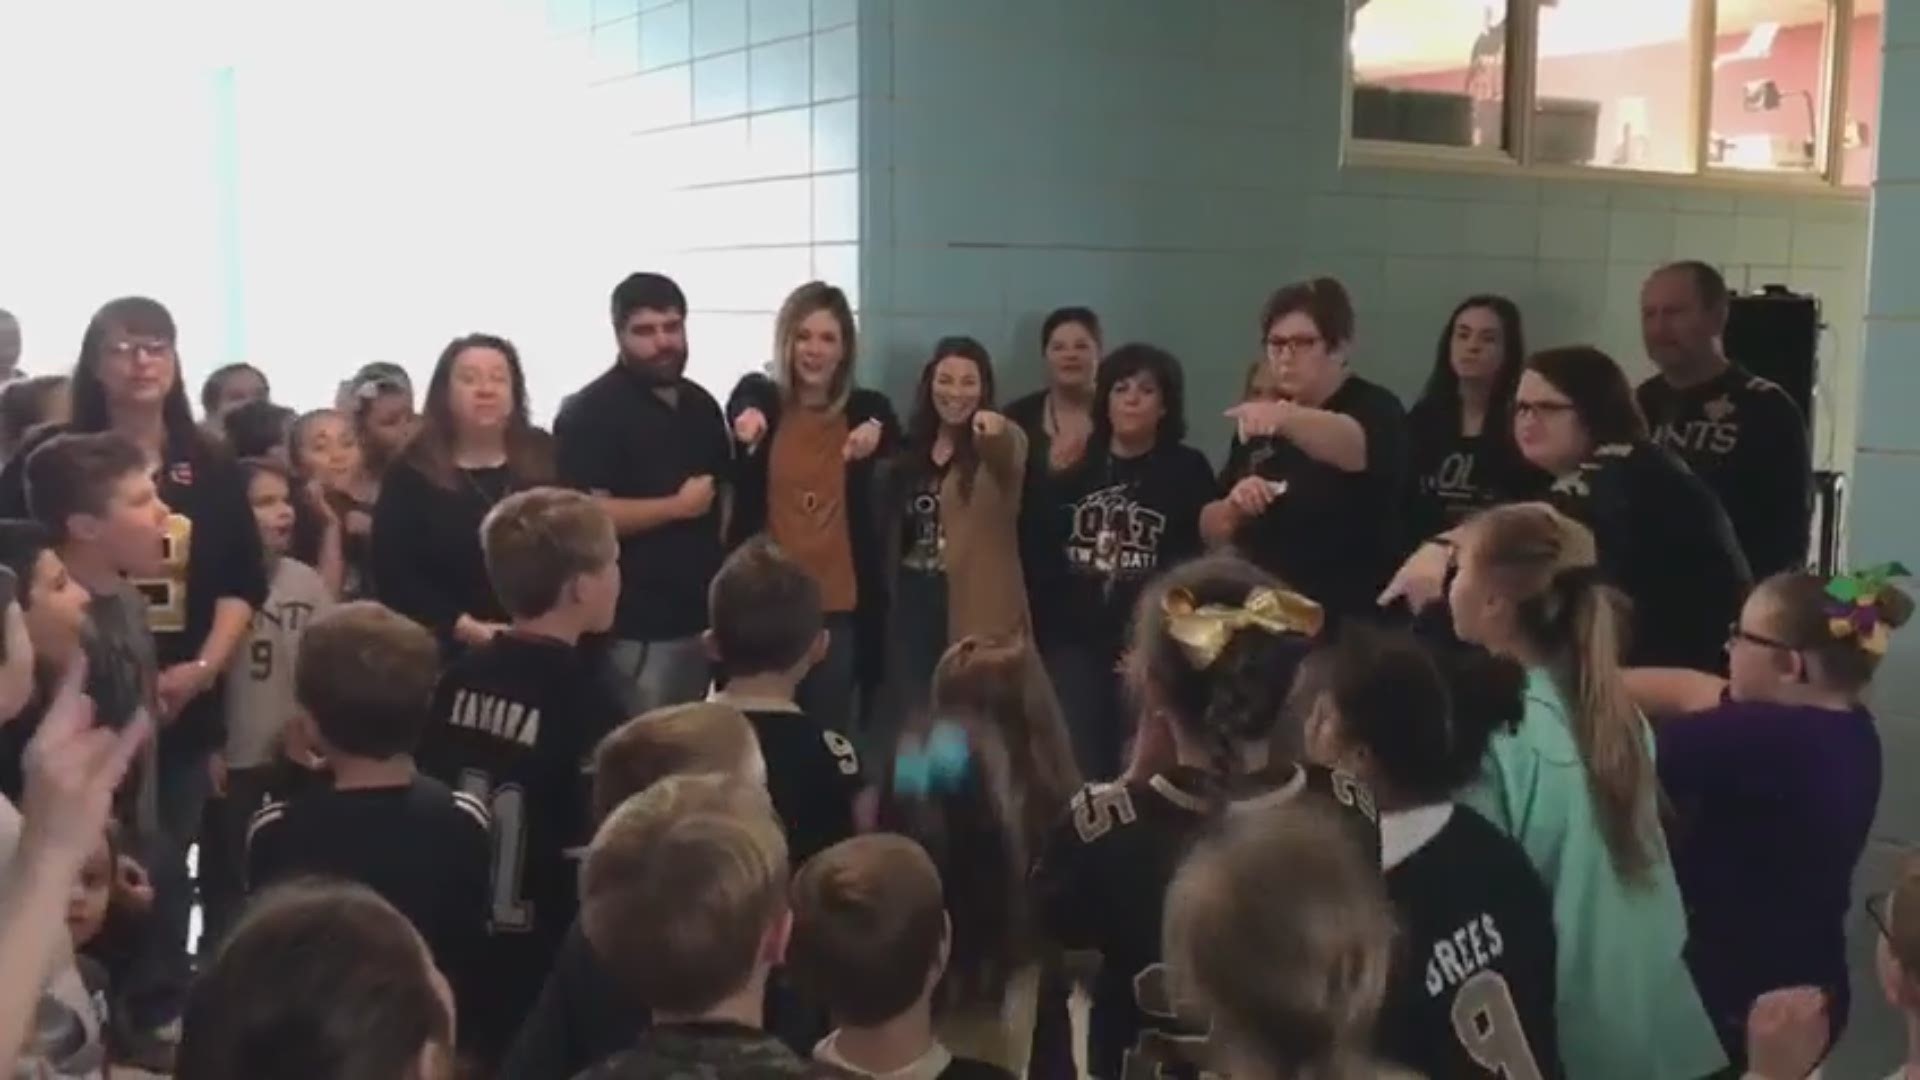 Some Who Dat fans held a pep rally at Holy Savior Catholic School in Lockport.